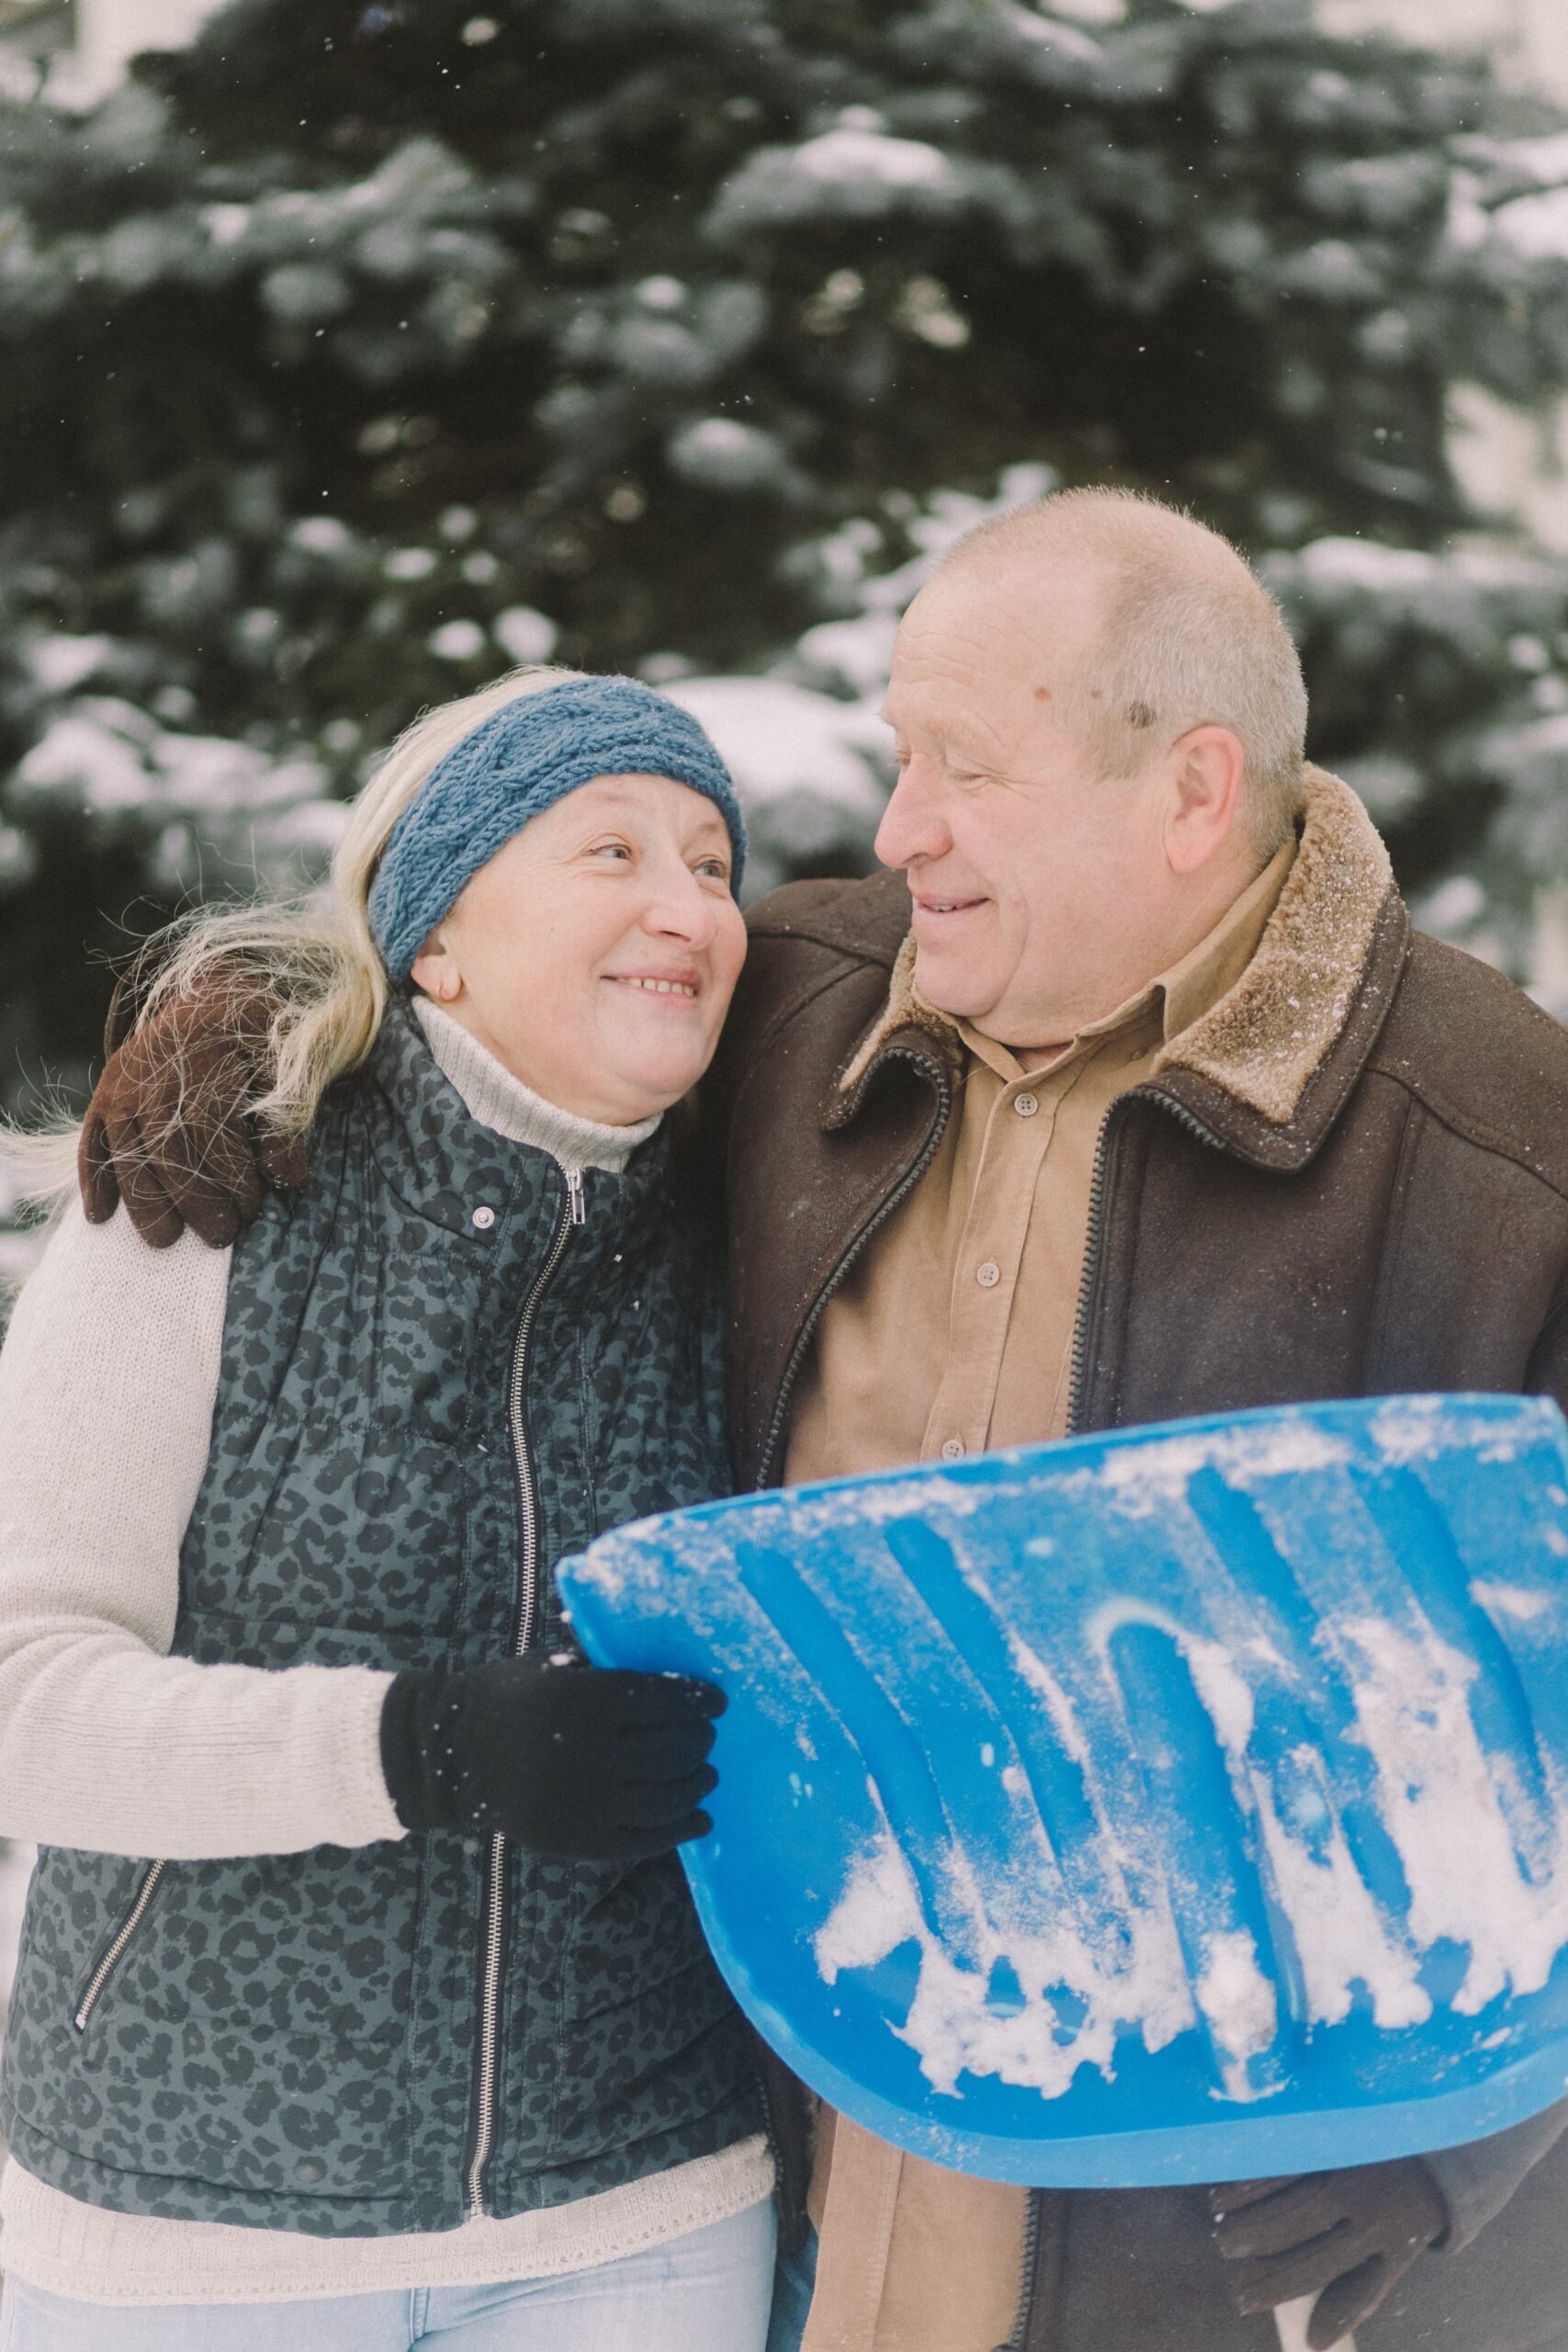 Afraid of falling in the cold weather? Fall Prevention!